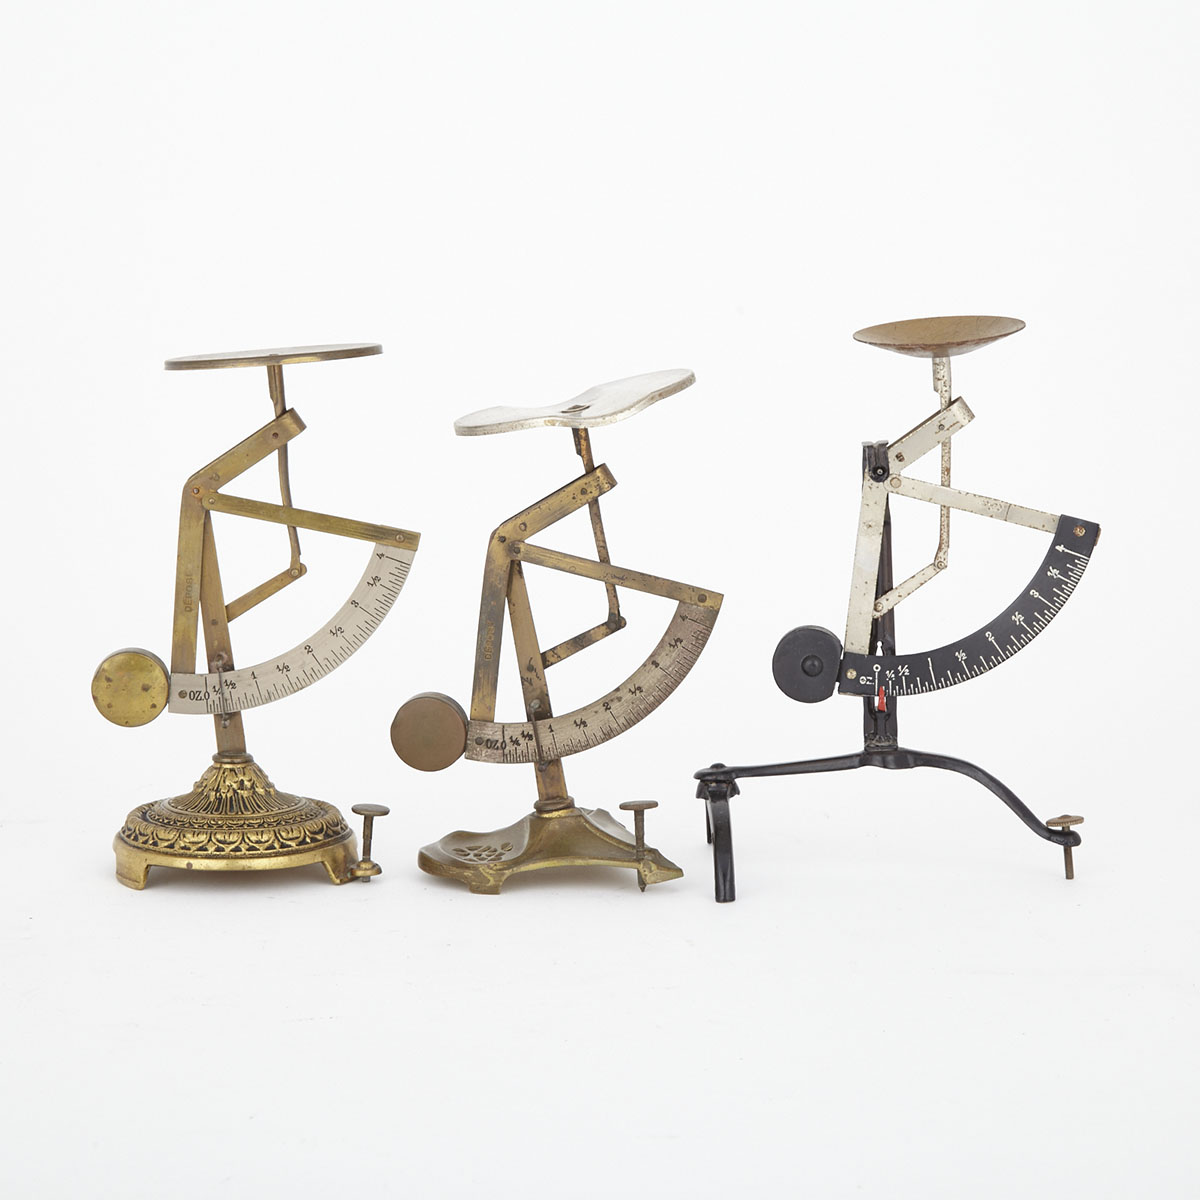 Three Continental Postal Scales, 19th and early 20th centuries